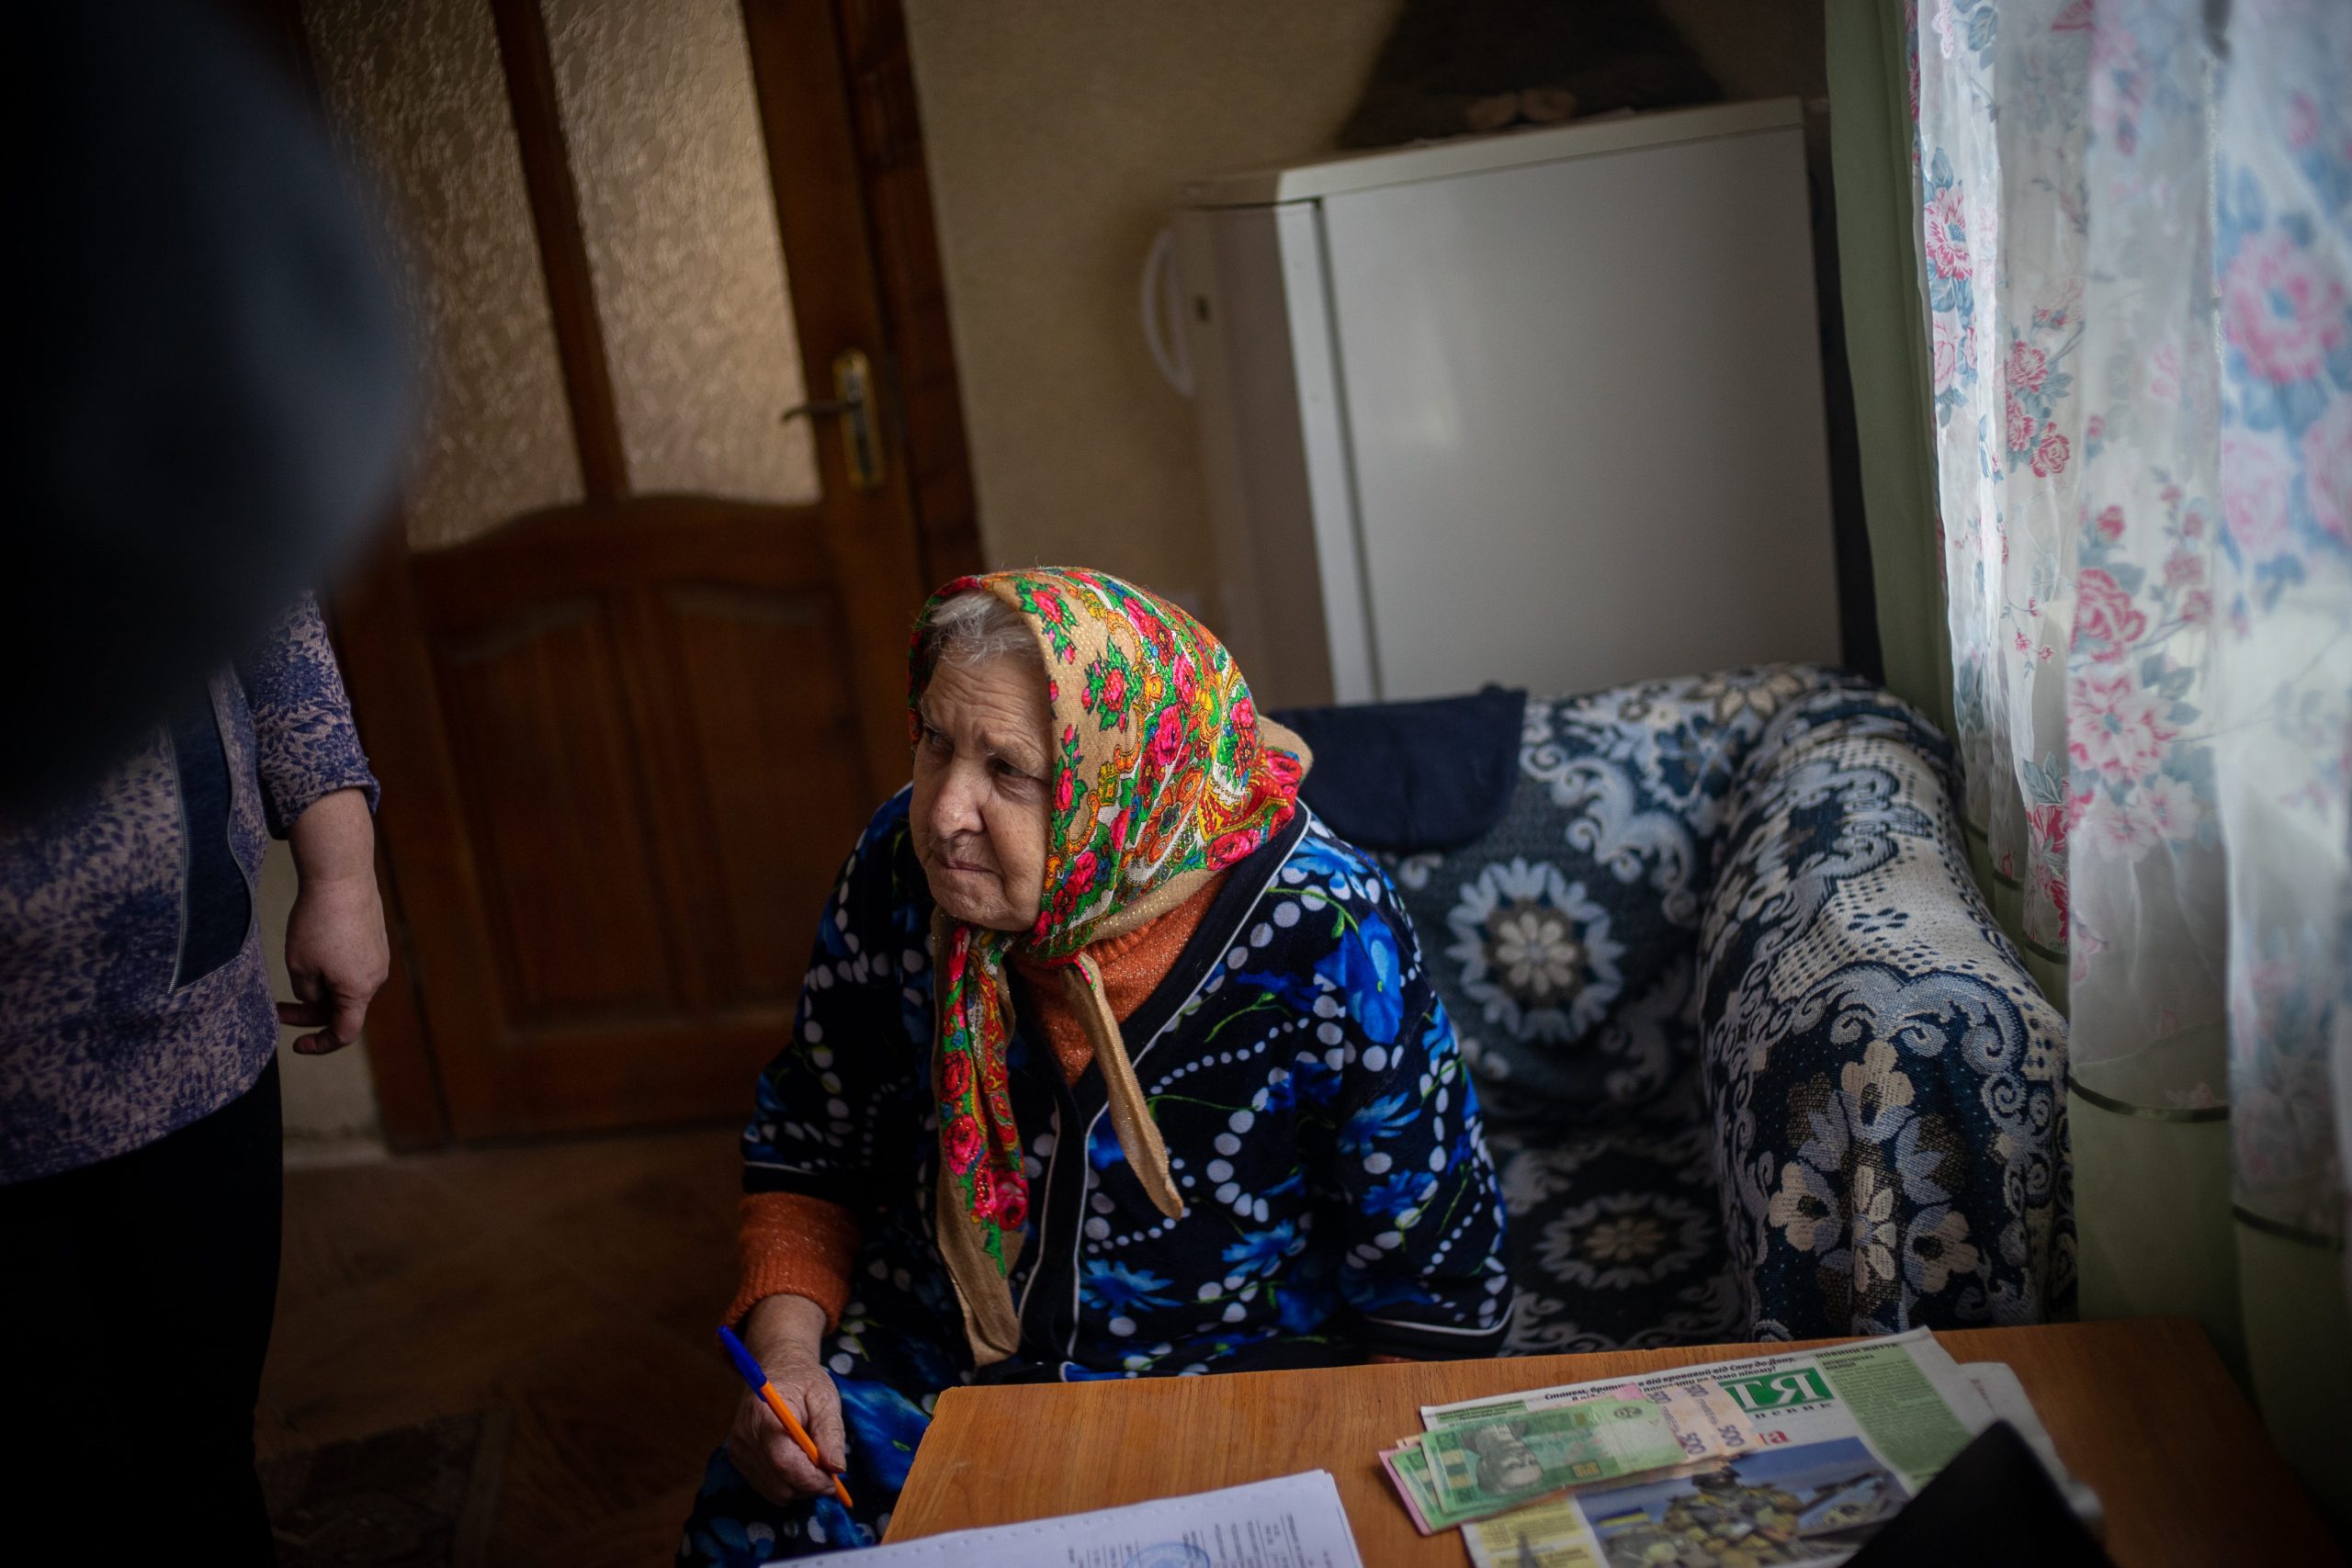 Elder woman sits in a chair in the kitchen.